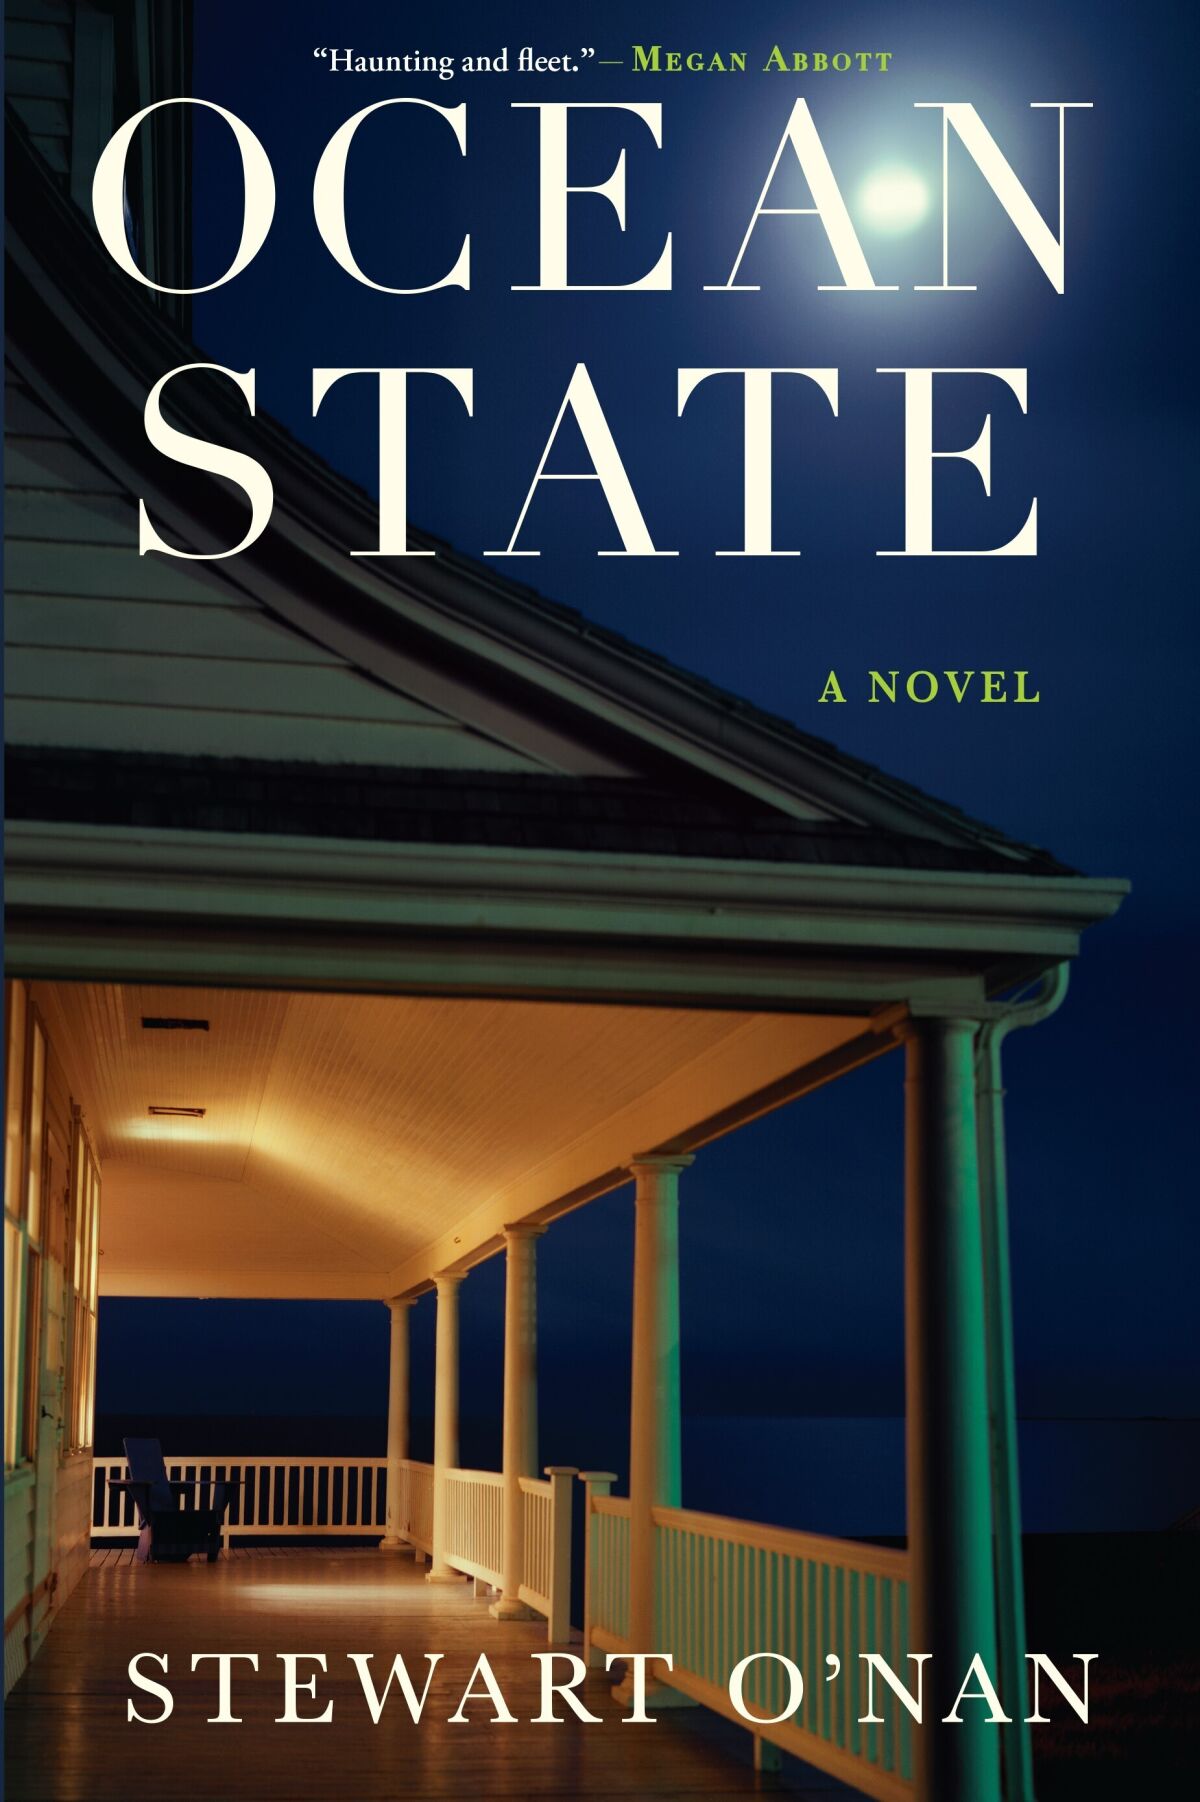 This cover image released by Grove Press shows "Ocean State" by Stewart O'Nan. (Grove Press via AP)